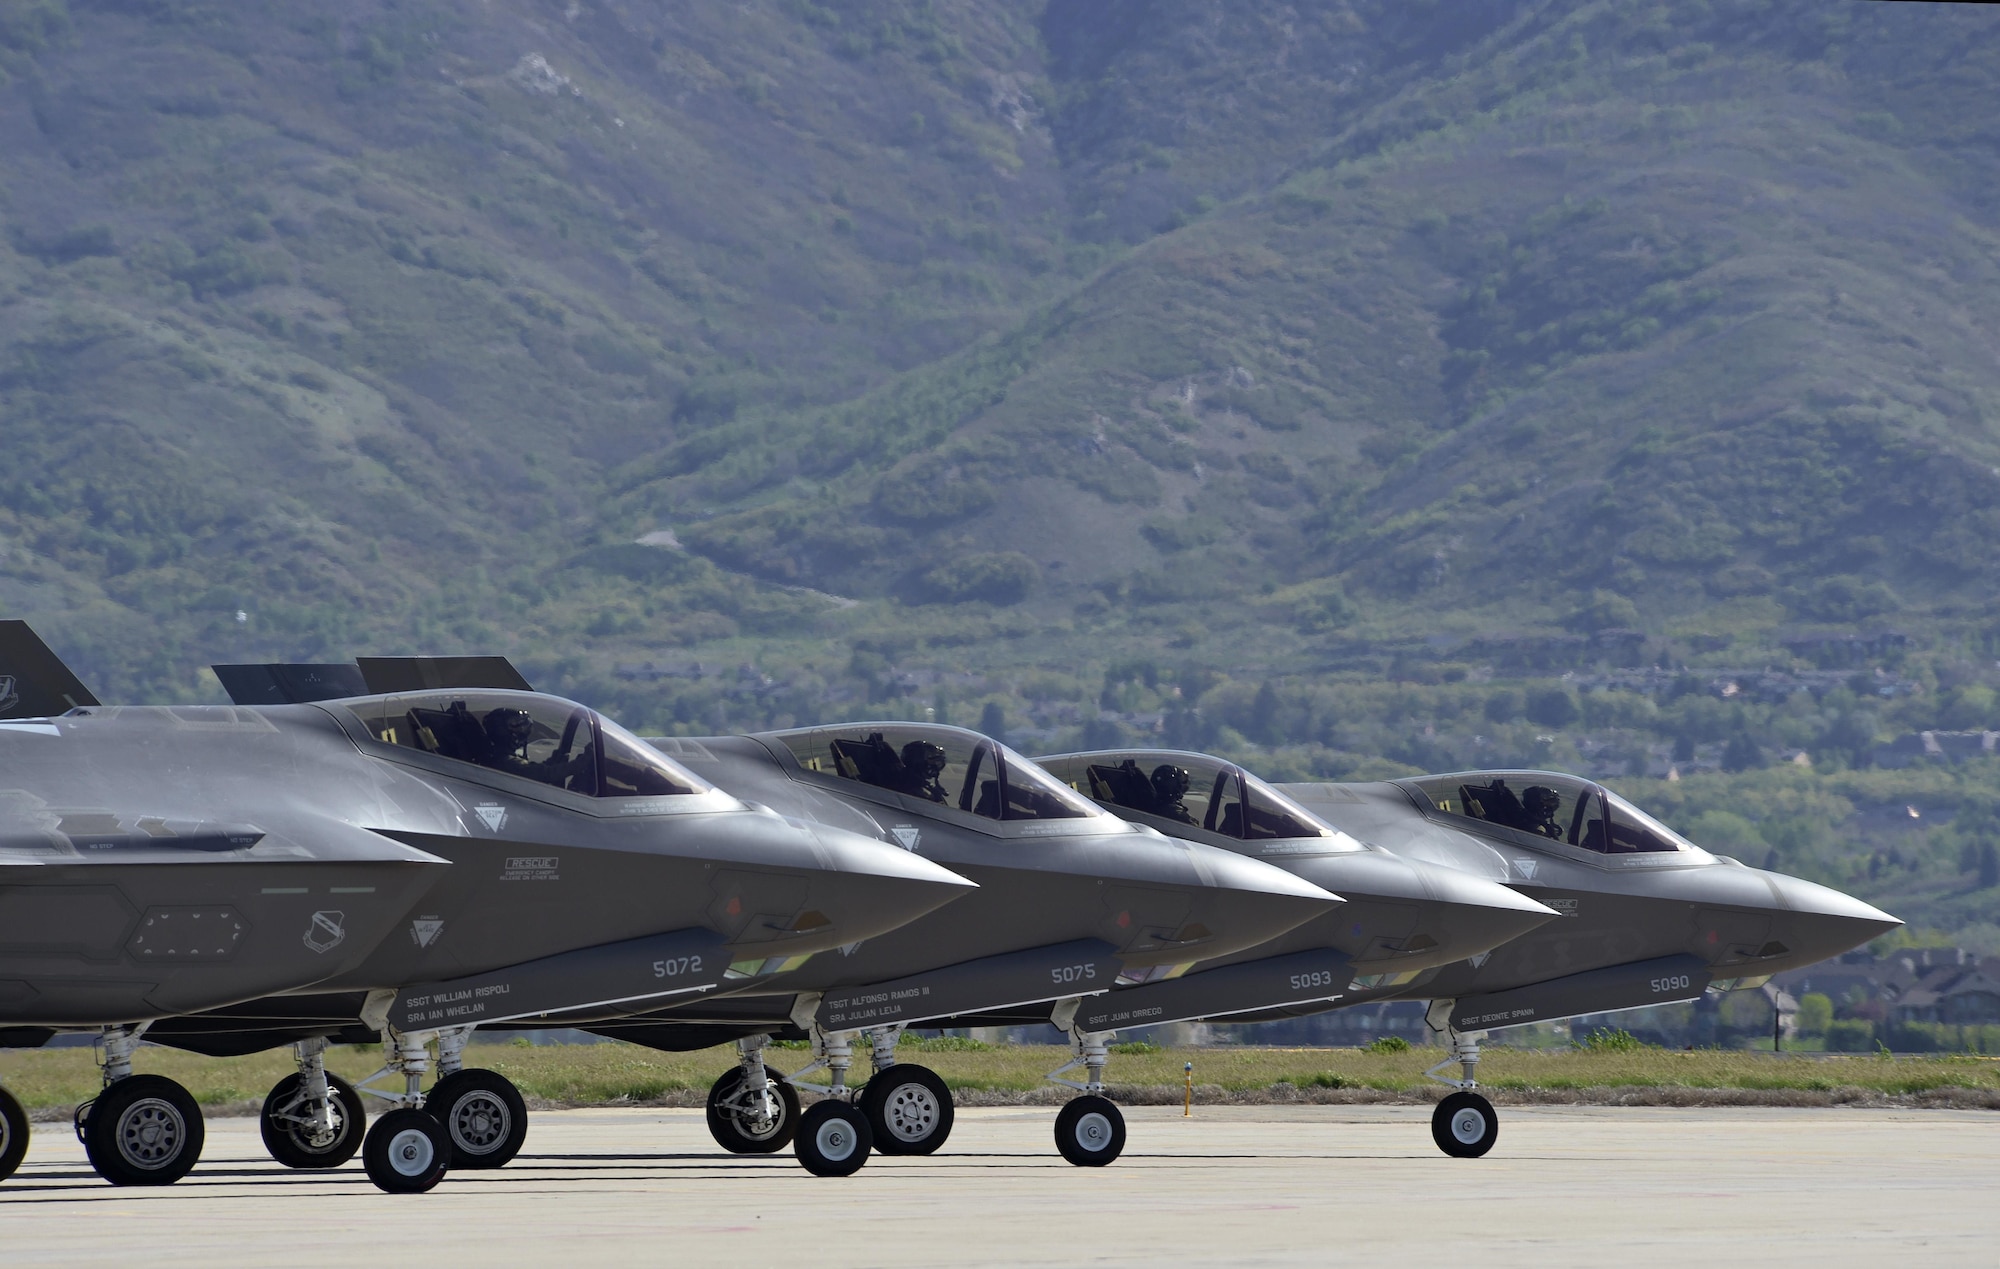 Four F-35 Lightning II aircraft prepare for takeoff at Hill Air Force Base, Utah, May 4. Hill's active duty and Reserve F-35 pilots recently began flying routine four-ship configurations, just as they would in combat. This marks a key milestone in getting the Air Force's newest fighter jet to reach Initial Operational Capability later this year, at which time it will be combat-ready. (U.S. Air Force photo by Paul Holcomb)